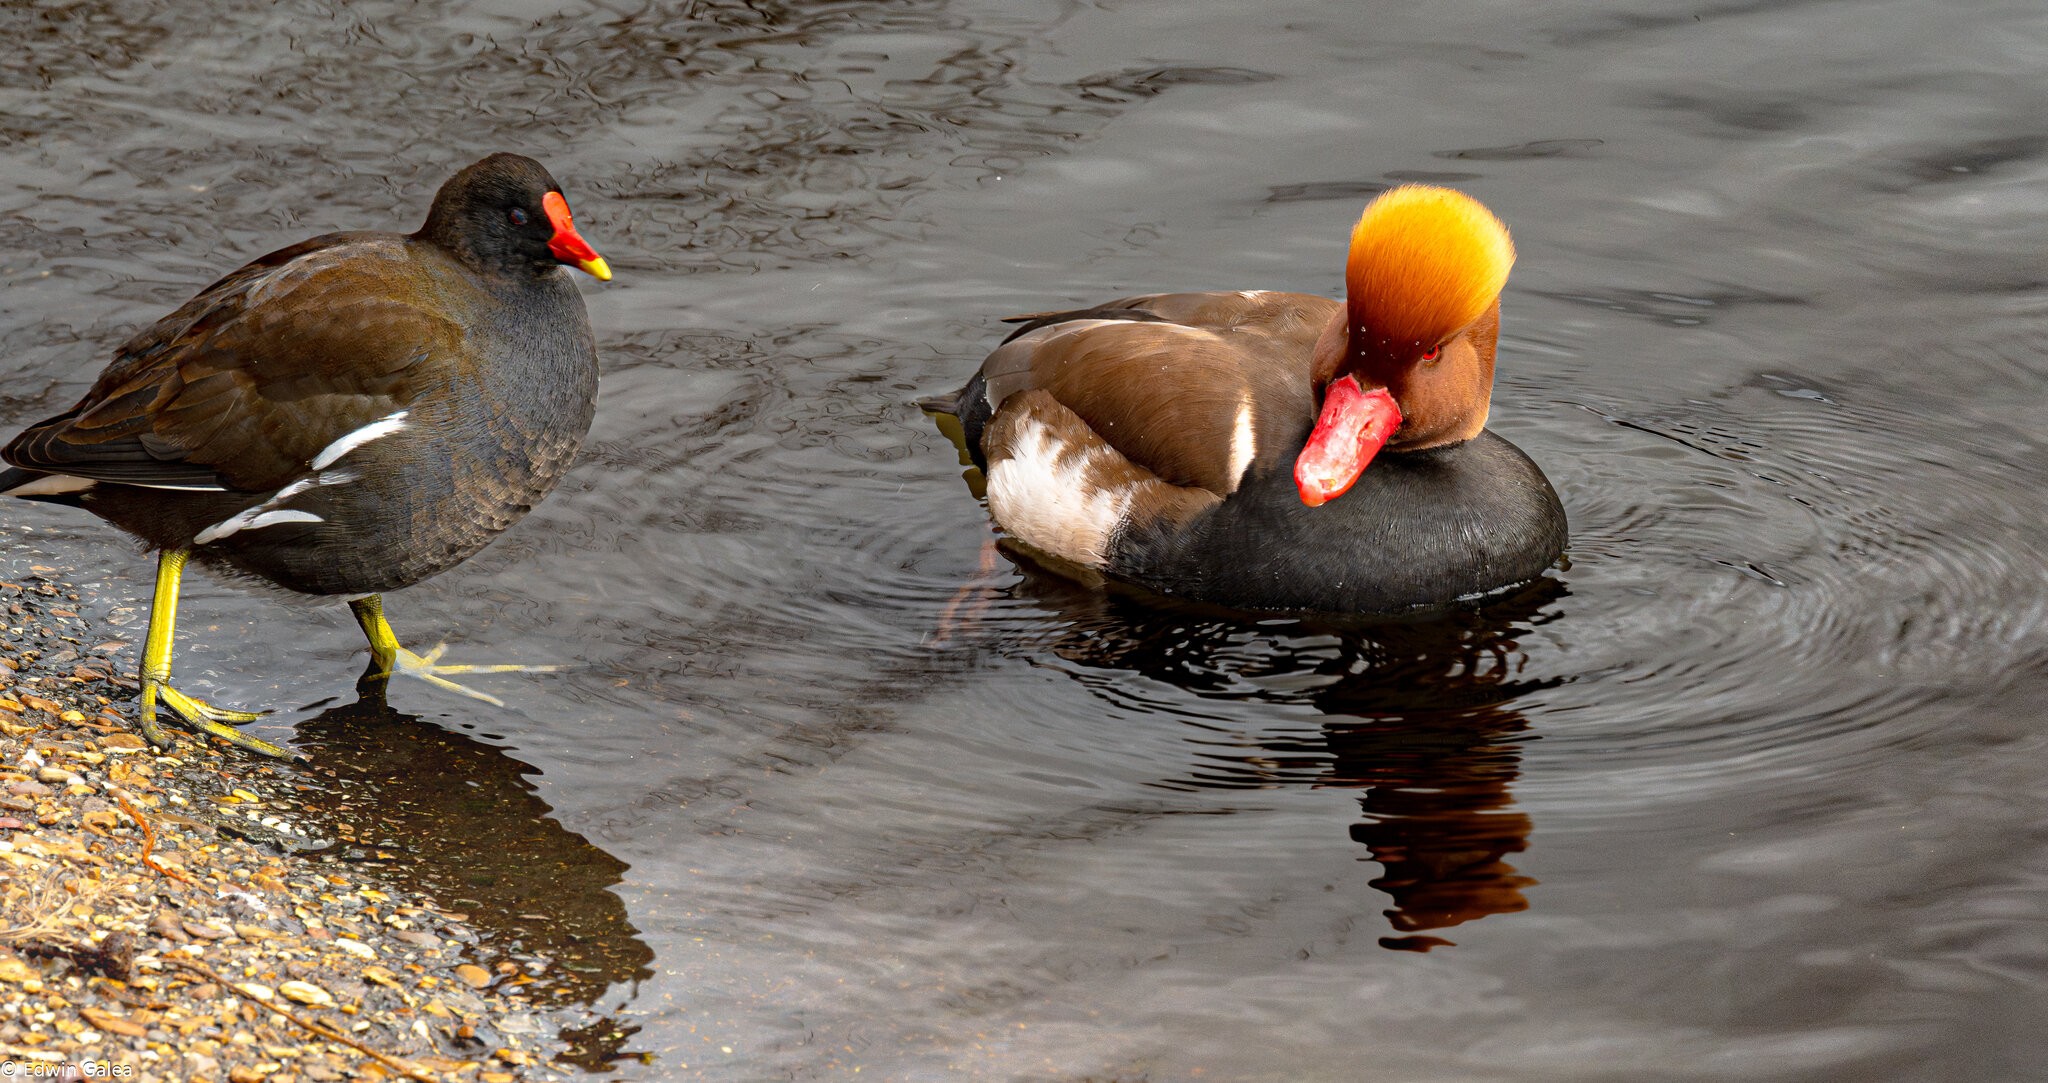 red_crested_pochard and friend-1 - Copy.jpg